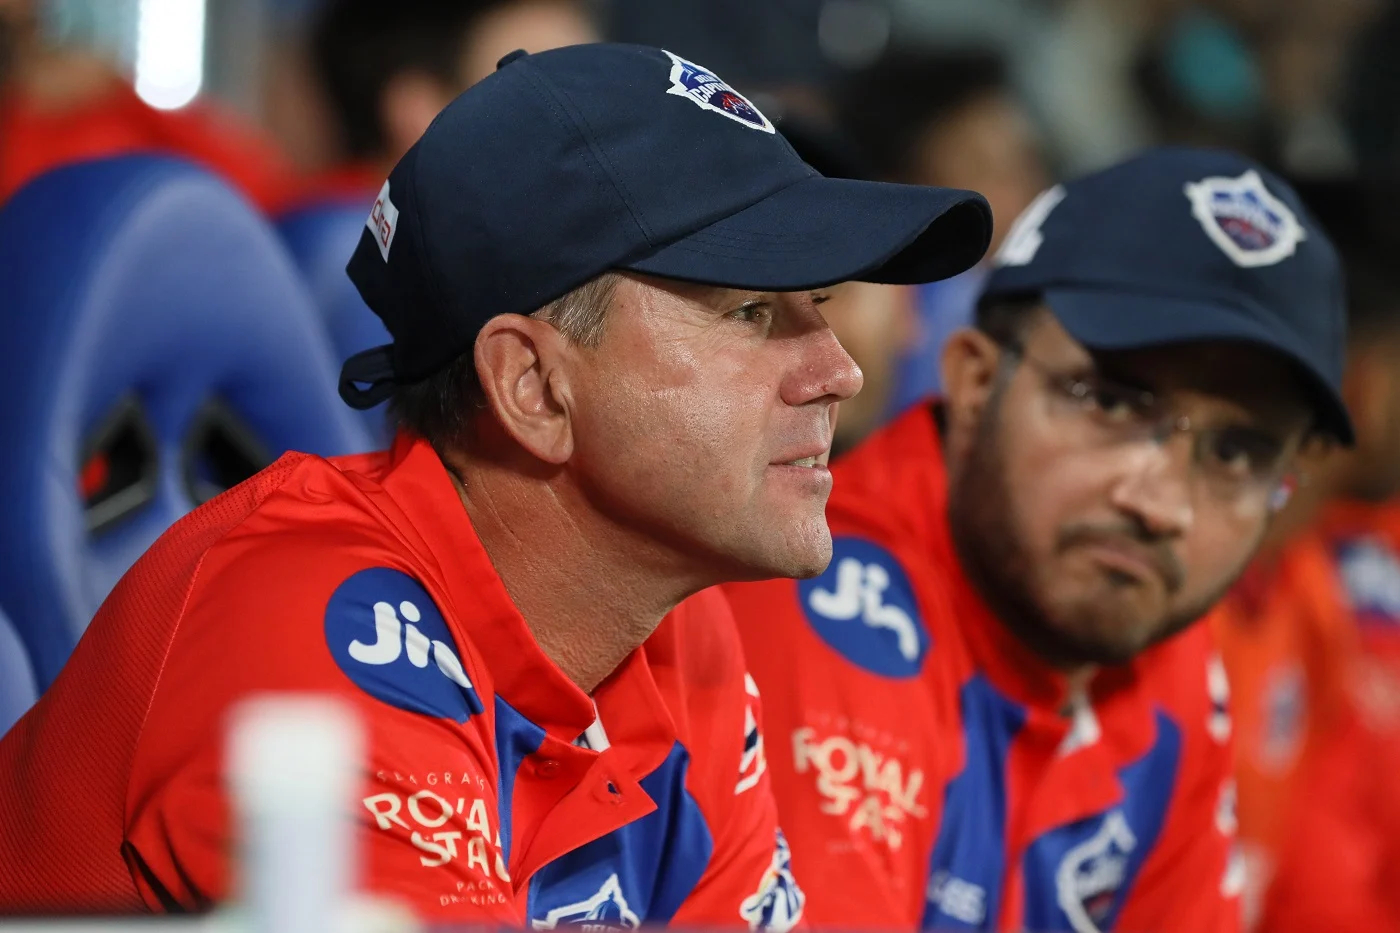 Ricky Ponting and Sourav Ganguly look on as DC lost to RCB by 23 runs | BCCI-IPL